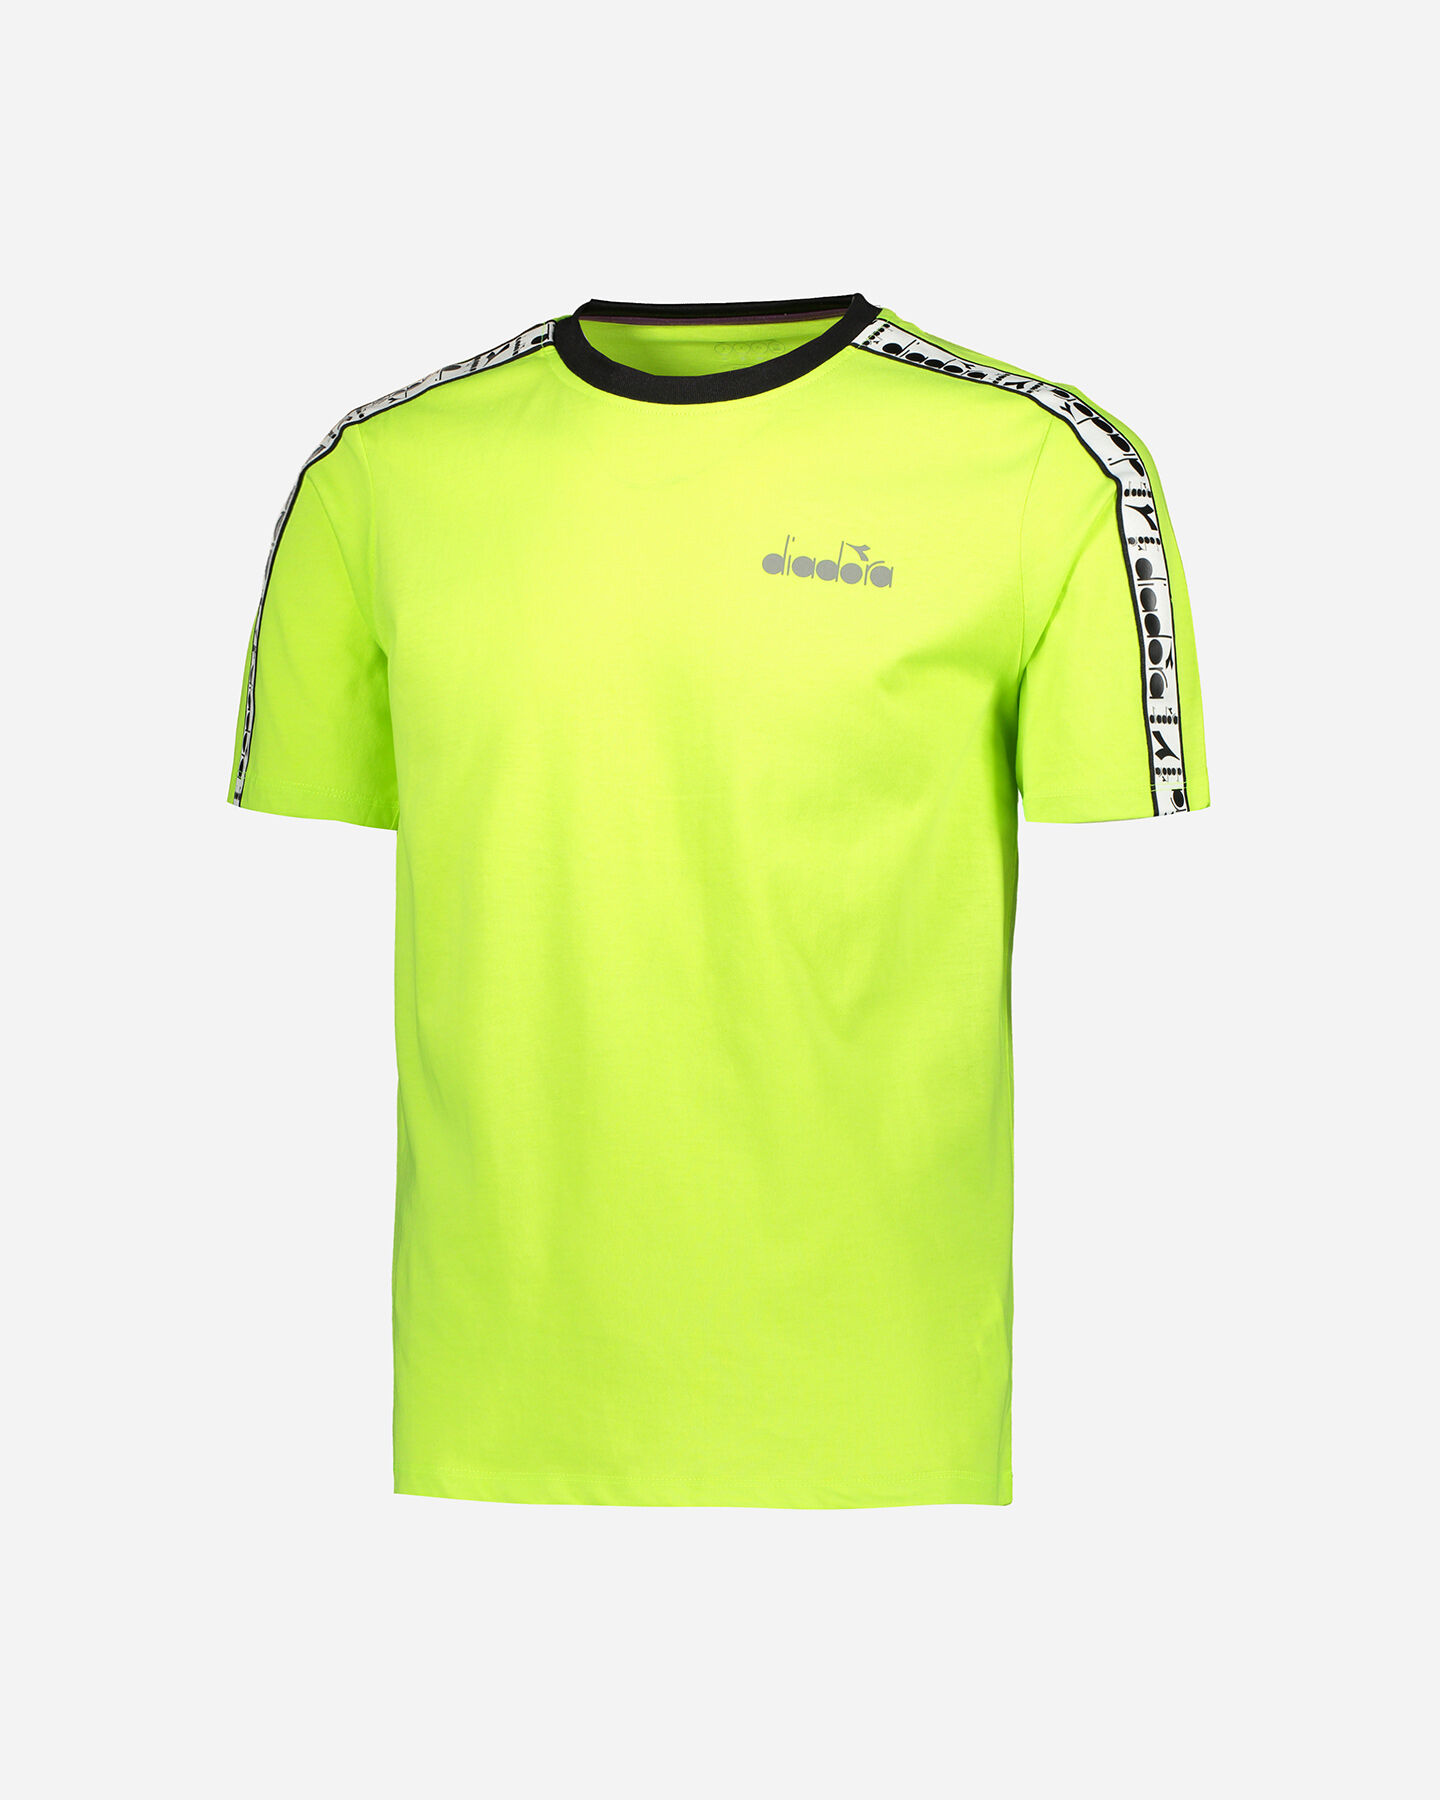  T-Shirt running DIADORA PLUS BE ONE M S5170770|97015|S scatto 0